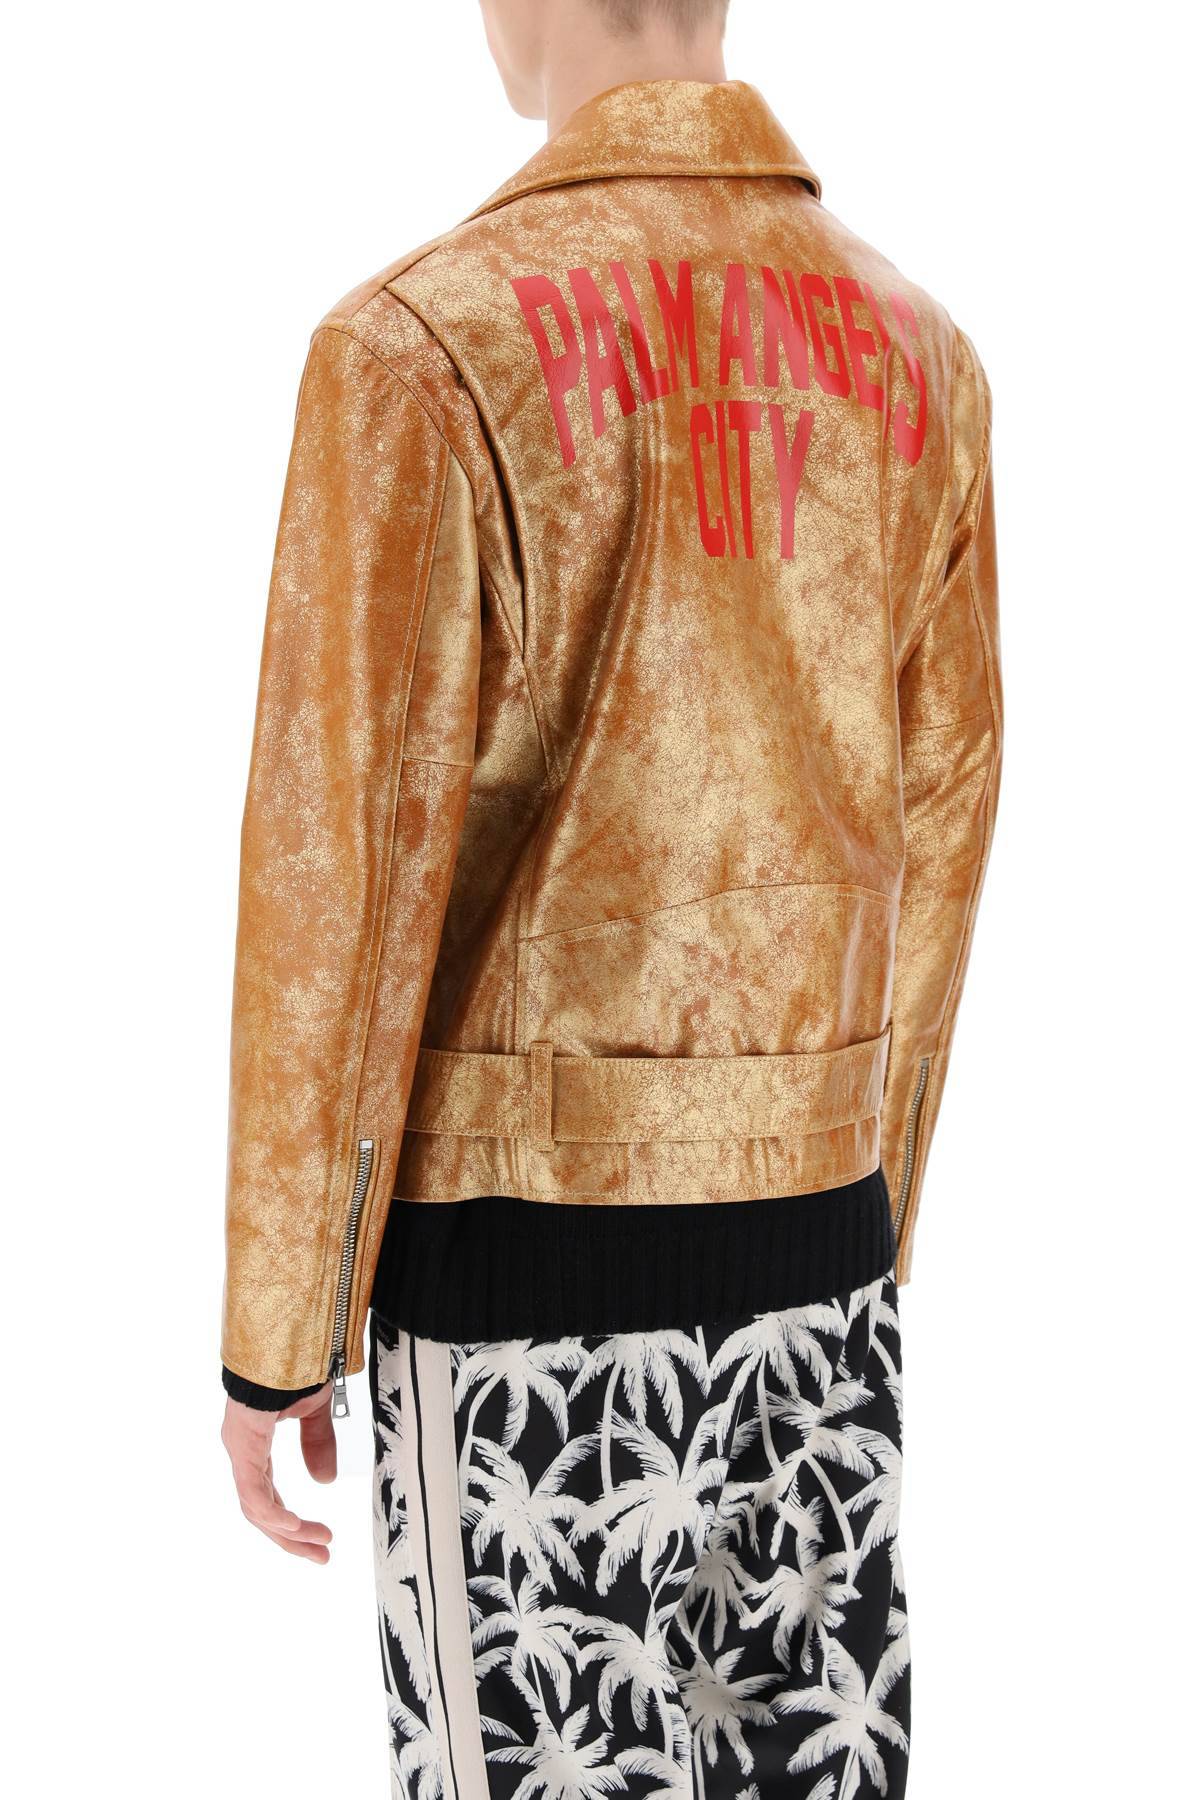 Shop Palm Angels Pa City Biker Jacket In Laminated Leather In Orange,gold